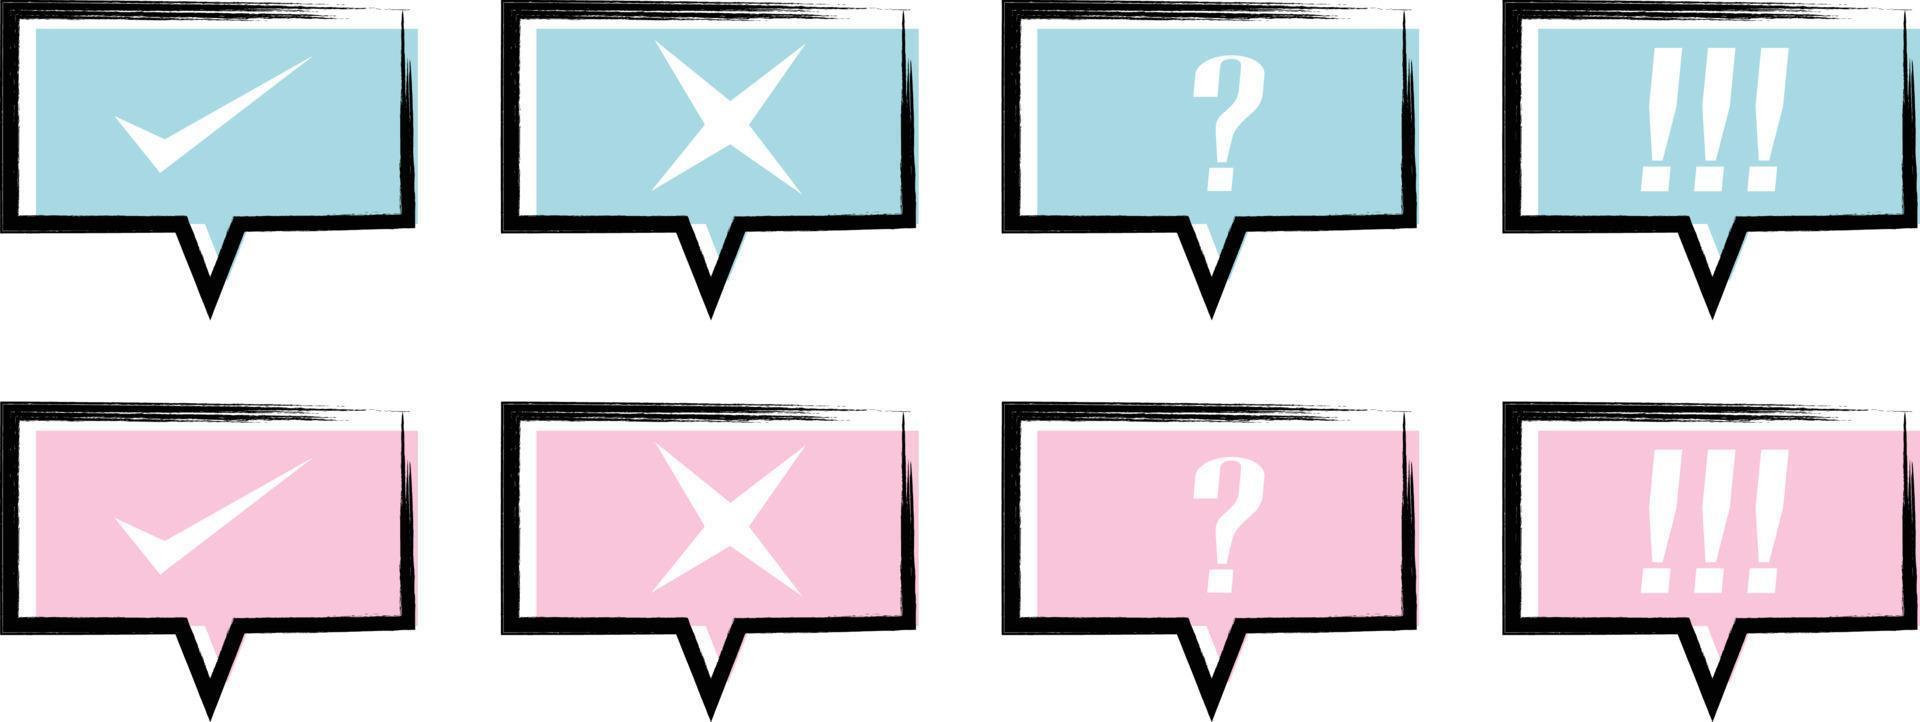 Outline stroke with a speech bubble with Correct, incorrect, question marks, and exclamation marks on light blue and pink bubbles vector